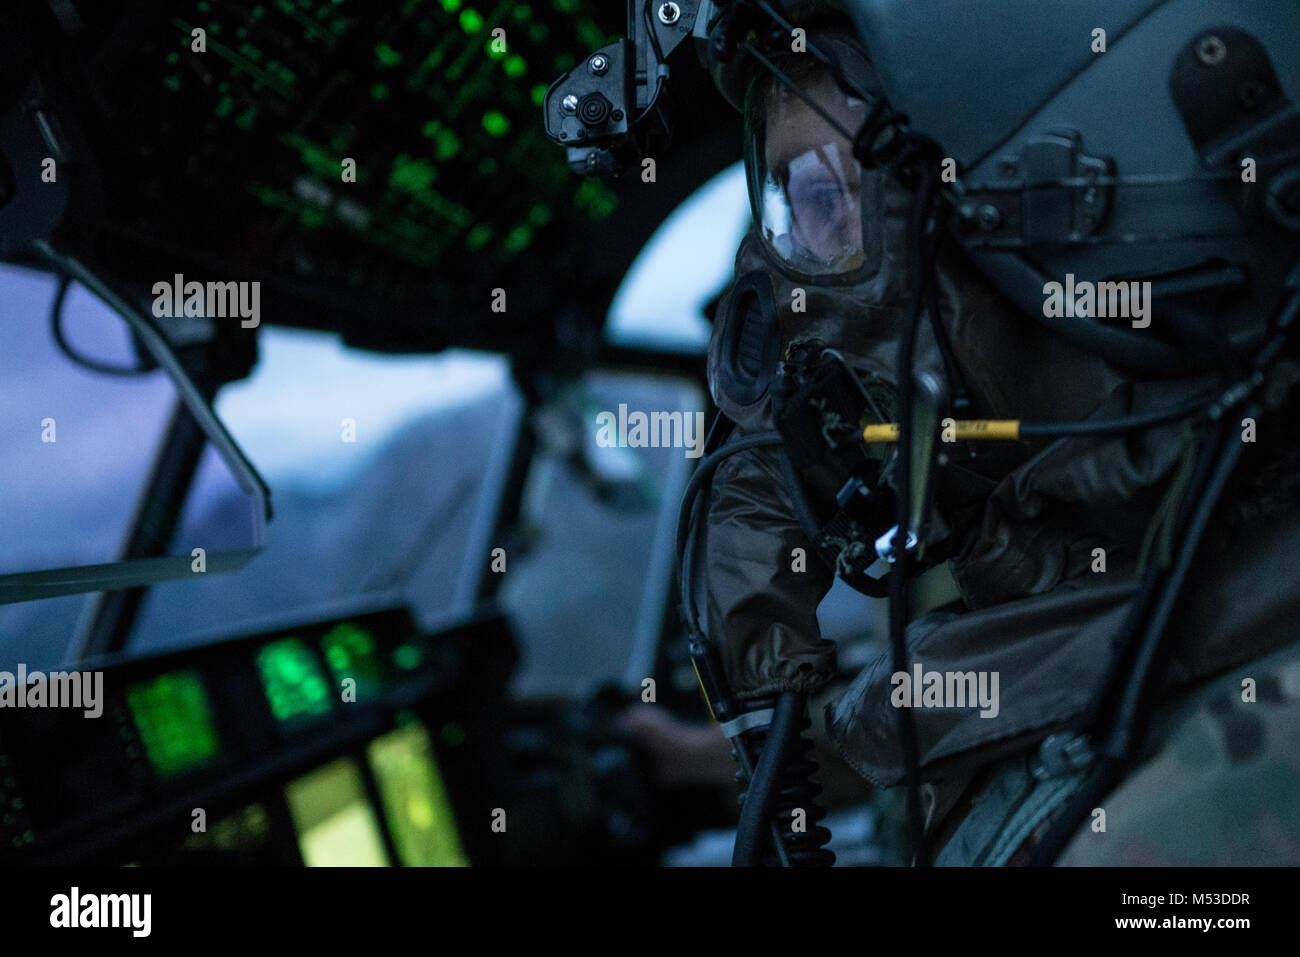 A U.S. Air Force 17th Special Operations Squadron pilot executes in-flight training with aircrew eye and respiratory protection system (AERPS) equipment Jan. 31, 2018, off the coast of Okinawa, Japan. Aircrew took turns donning equipment in-flight, while the remainder of the crew monitored them as a safety precaution. (U.S. Air Force photo by Capt. Jessica Tait) Stock Photo